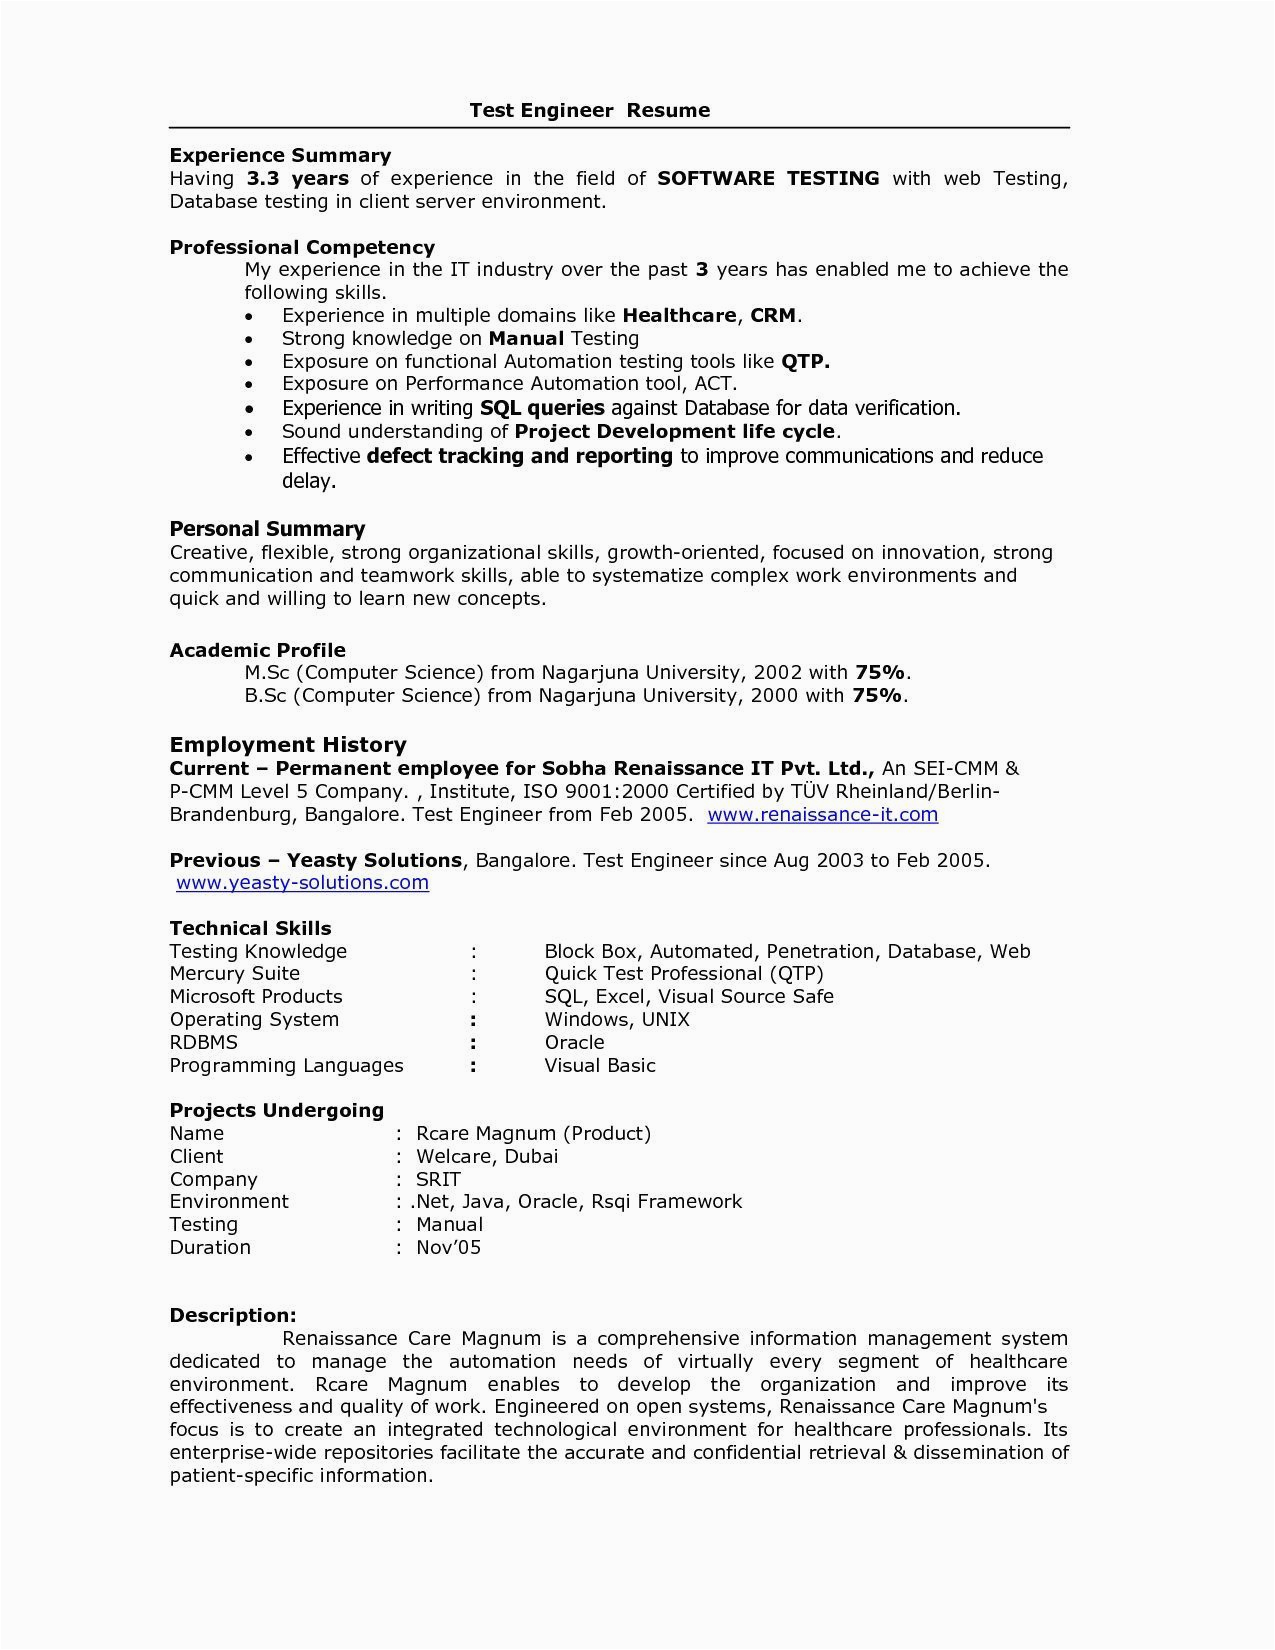 Resume Samples 3 5 Years Experience 5 Years Testing Experience